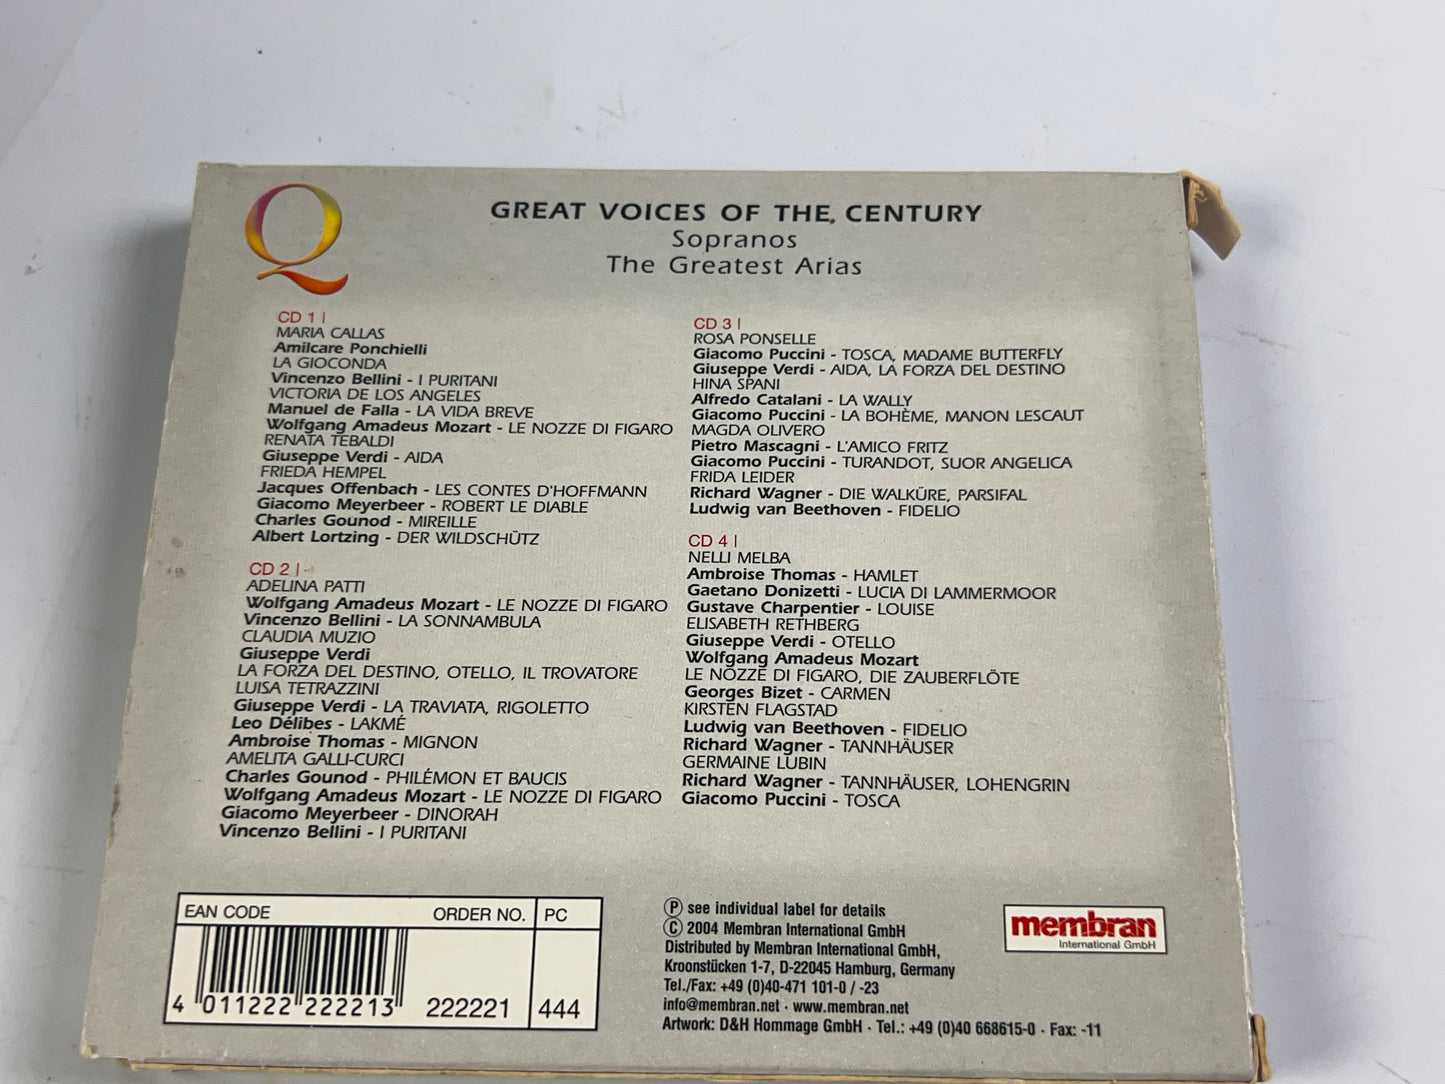 GREAT VOICES OF THE CENTURY: SOPRANOS (4 CD Set, 2004, Import)